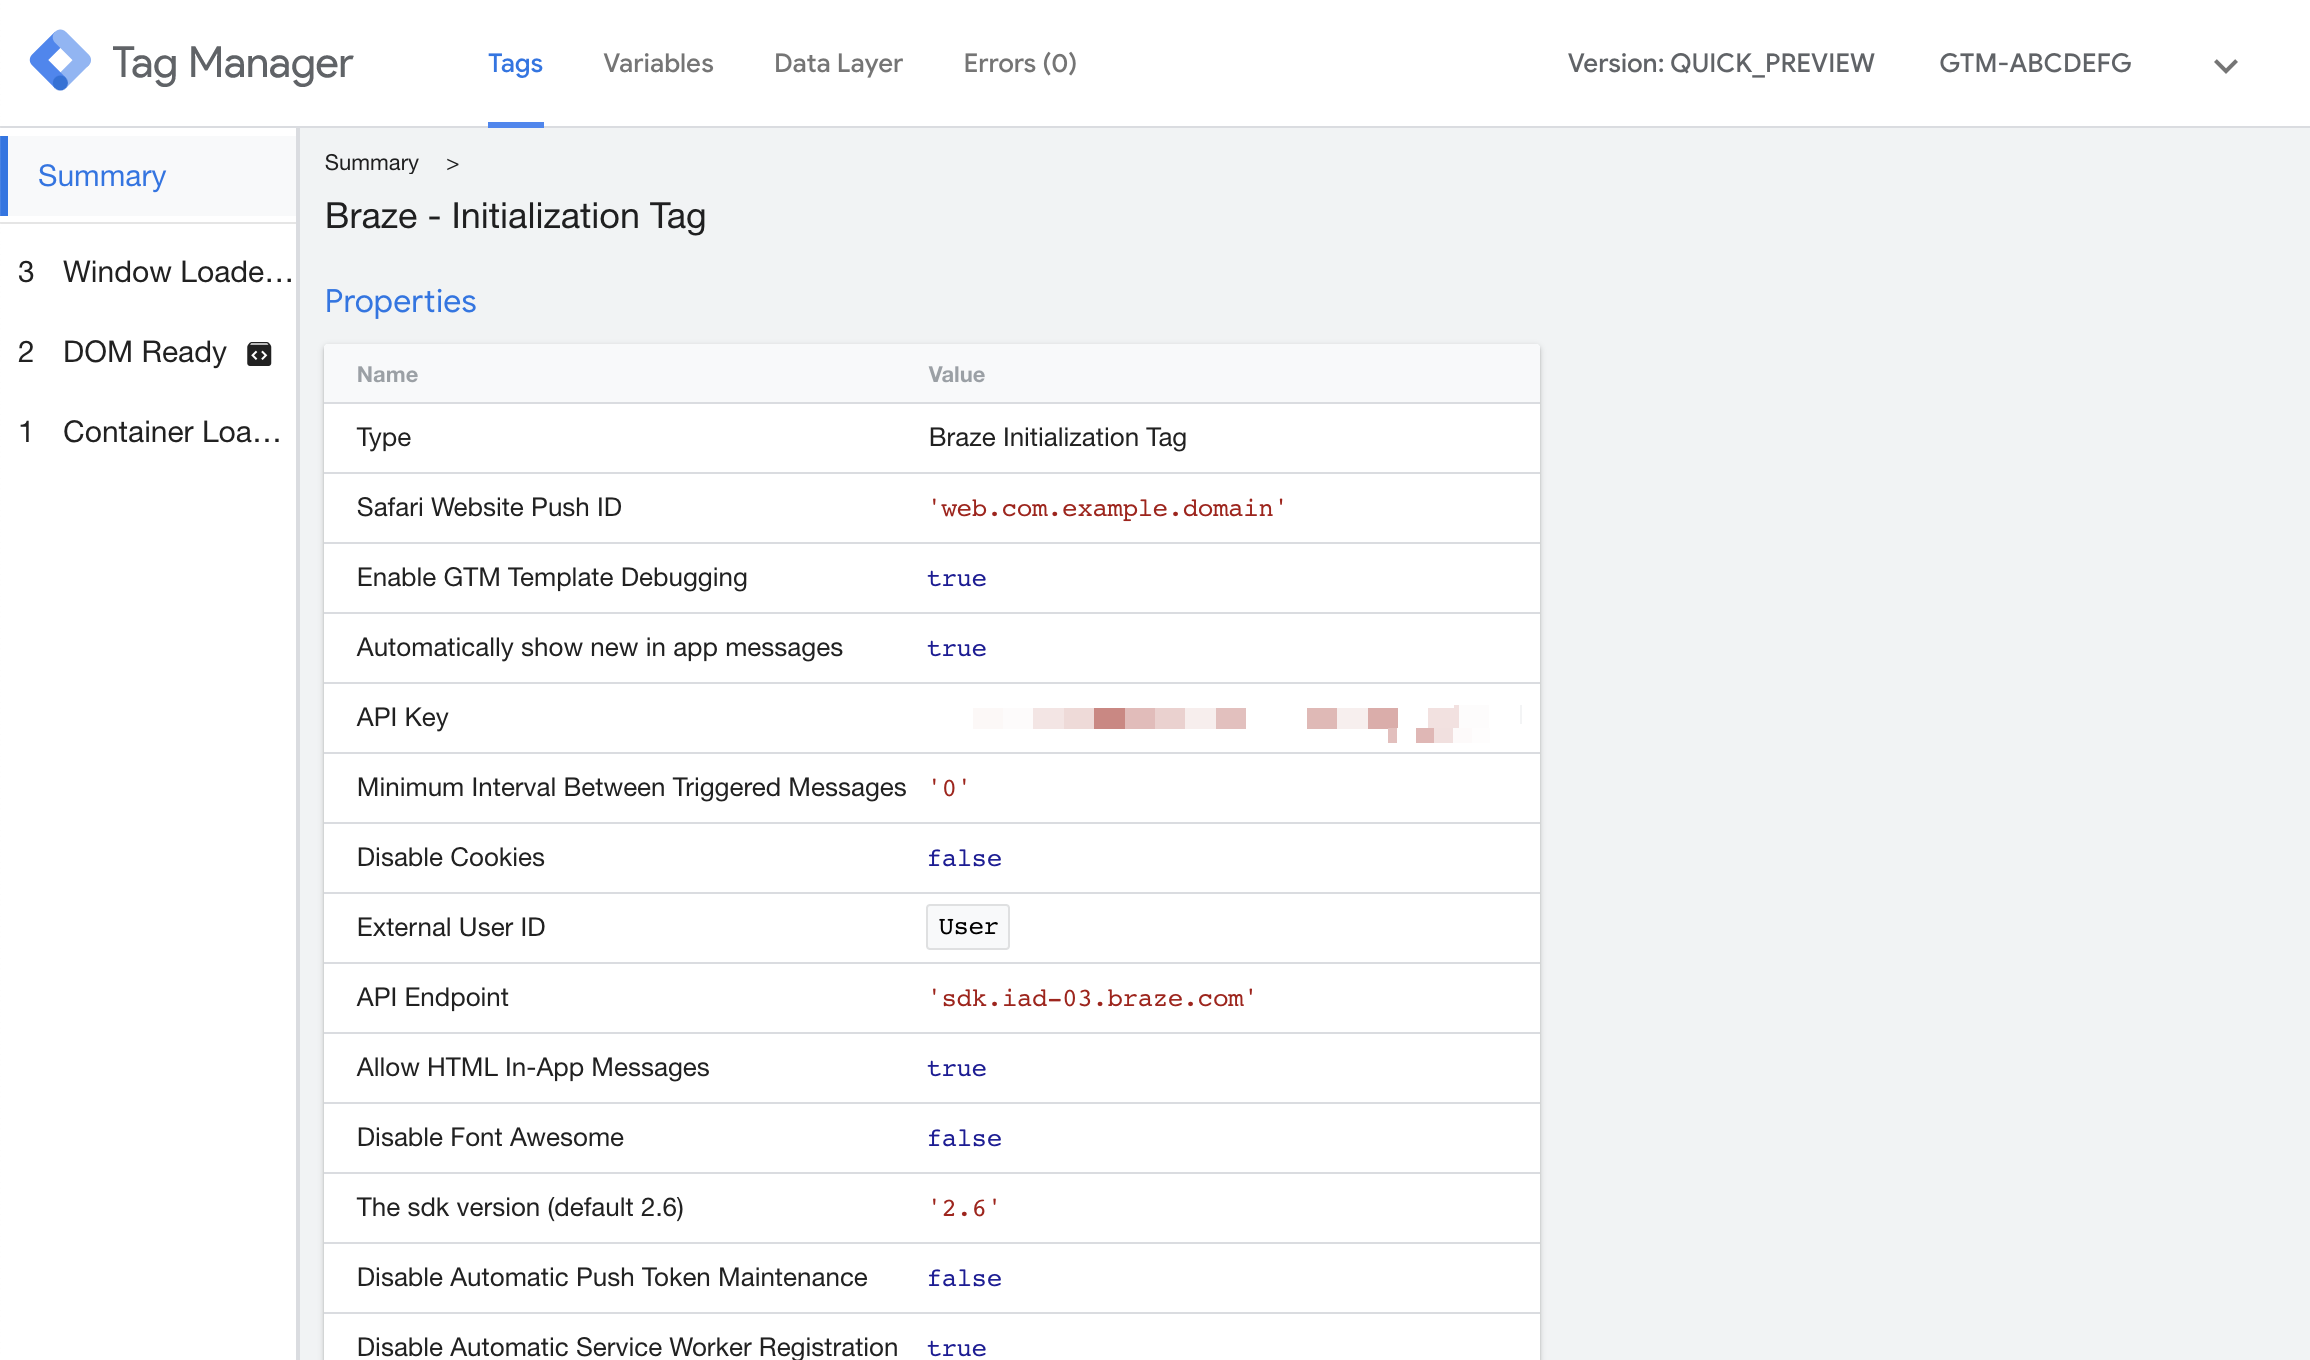 The Braze Initialization Tag summary page provides an overview of the tag, including information on which tags were triggered.